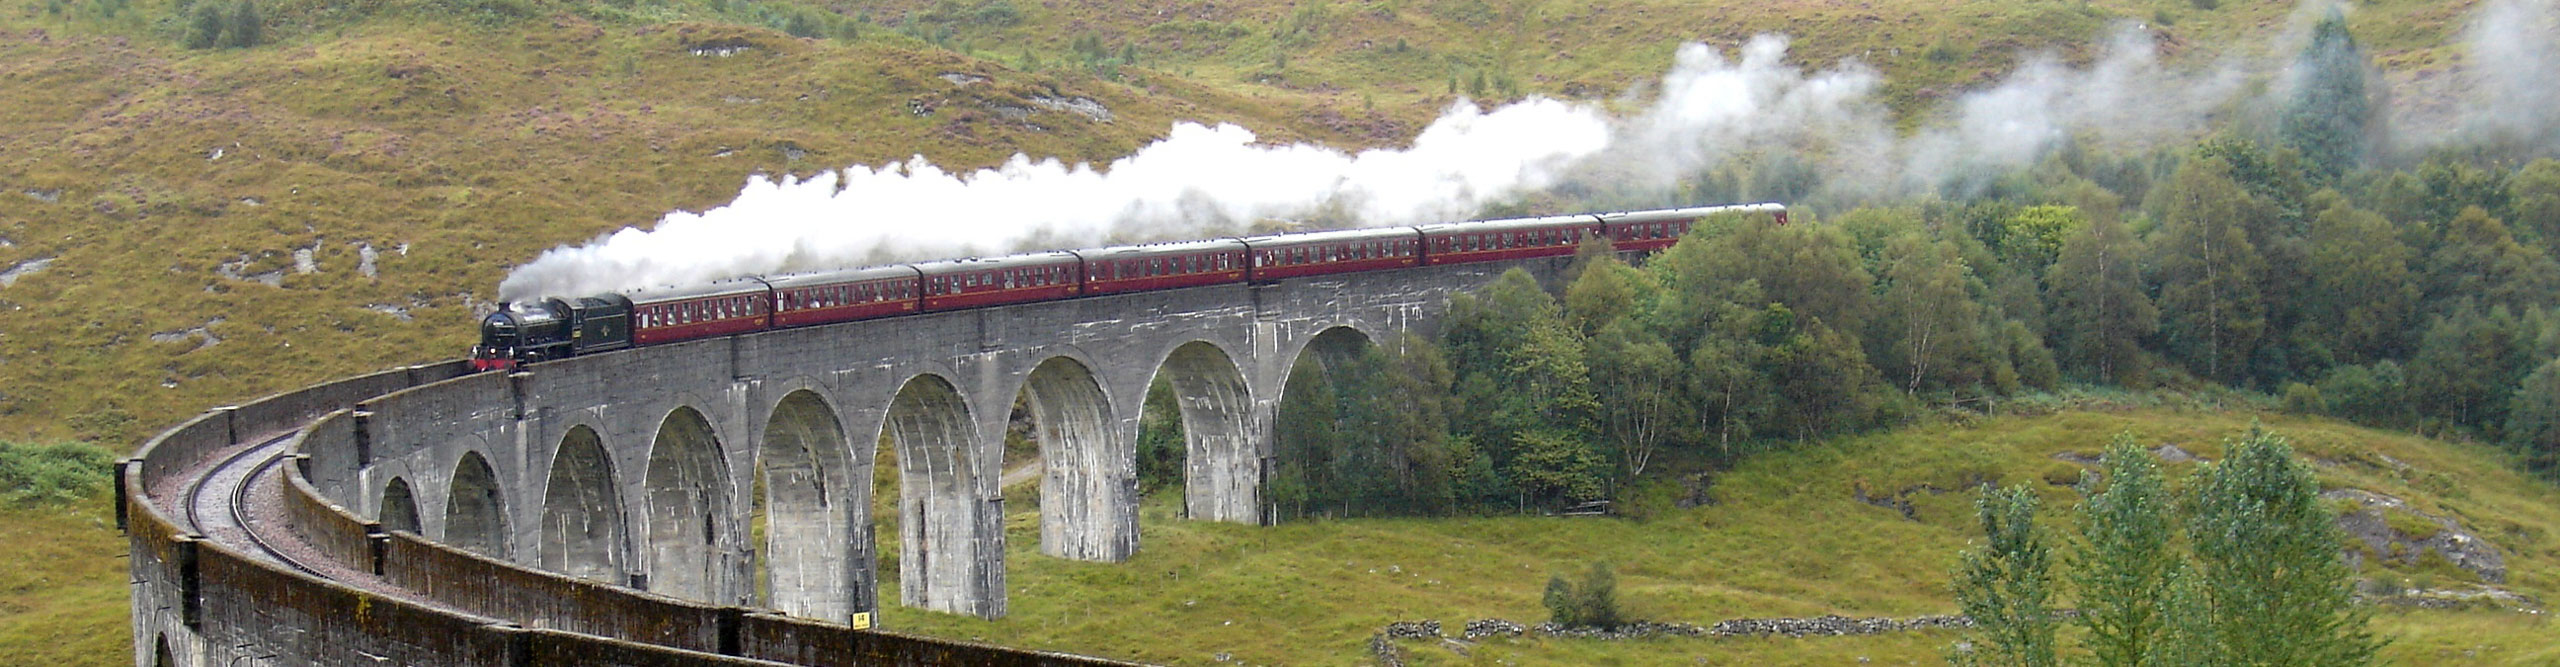 steam train on viaduct in the hills of Scotland